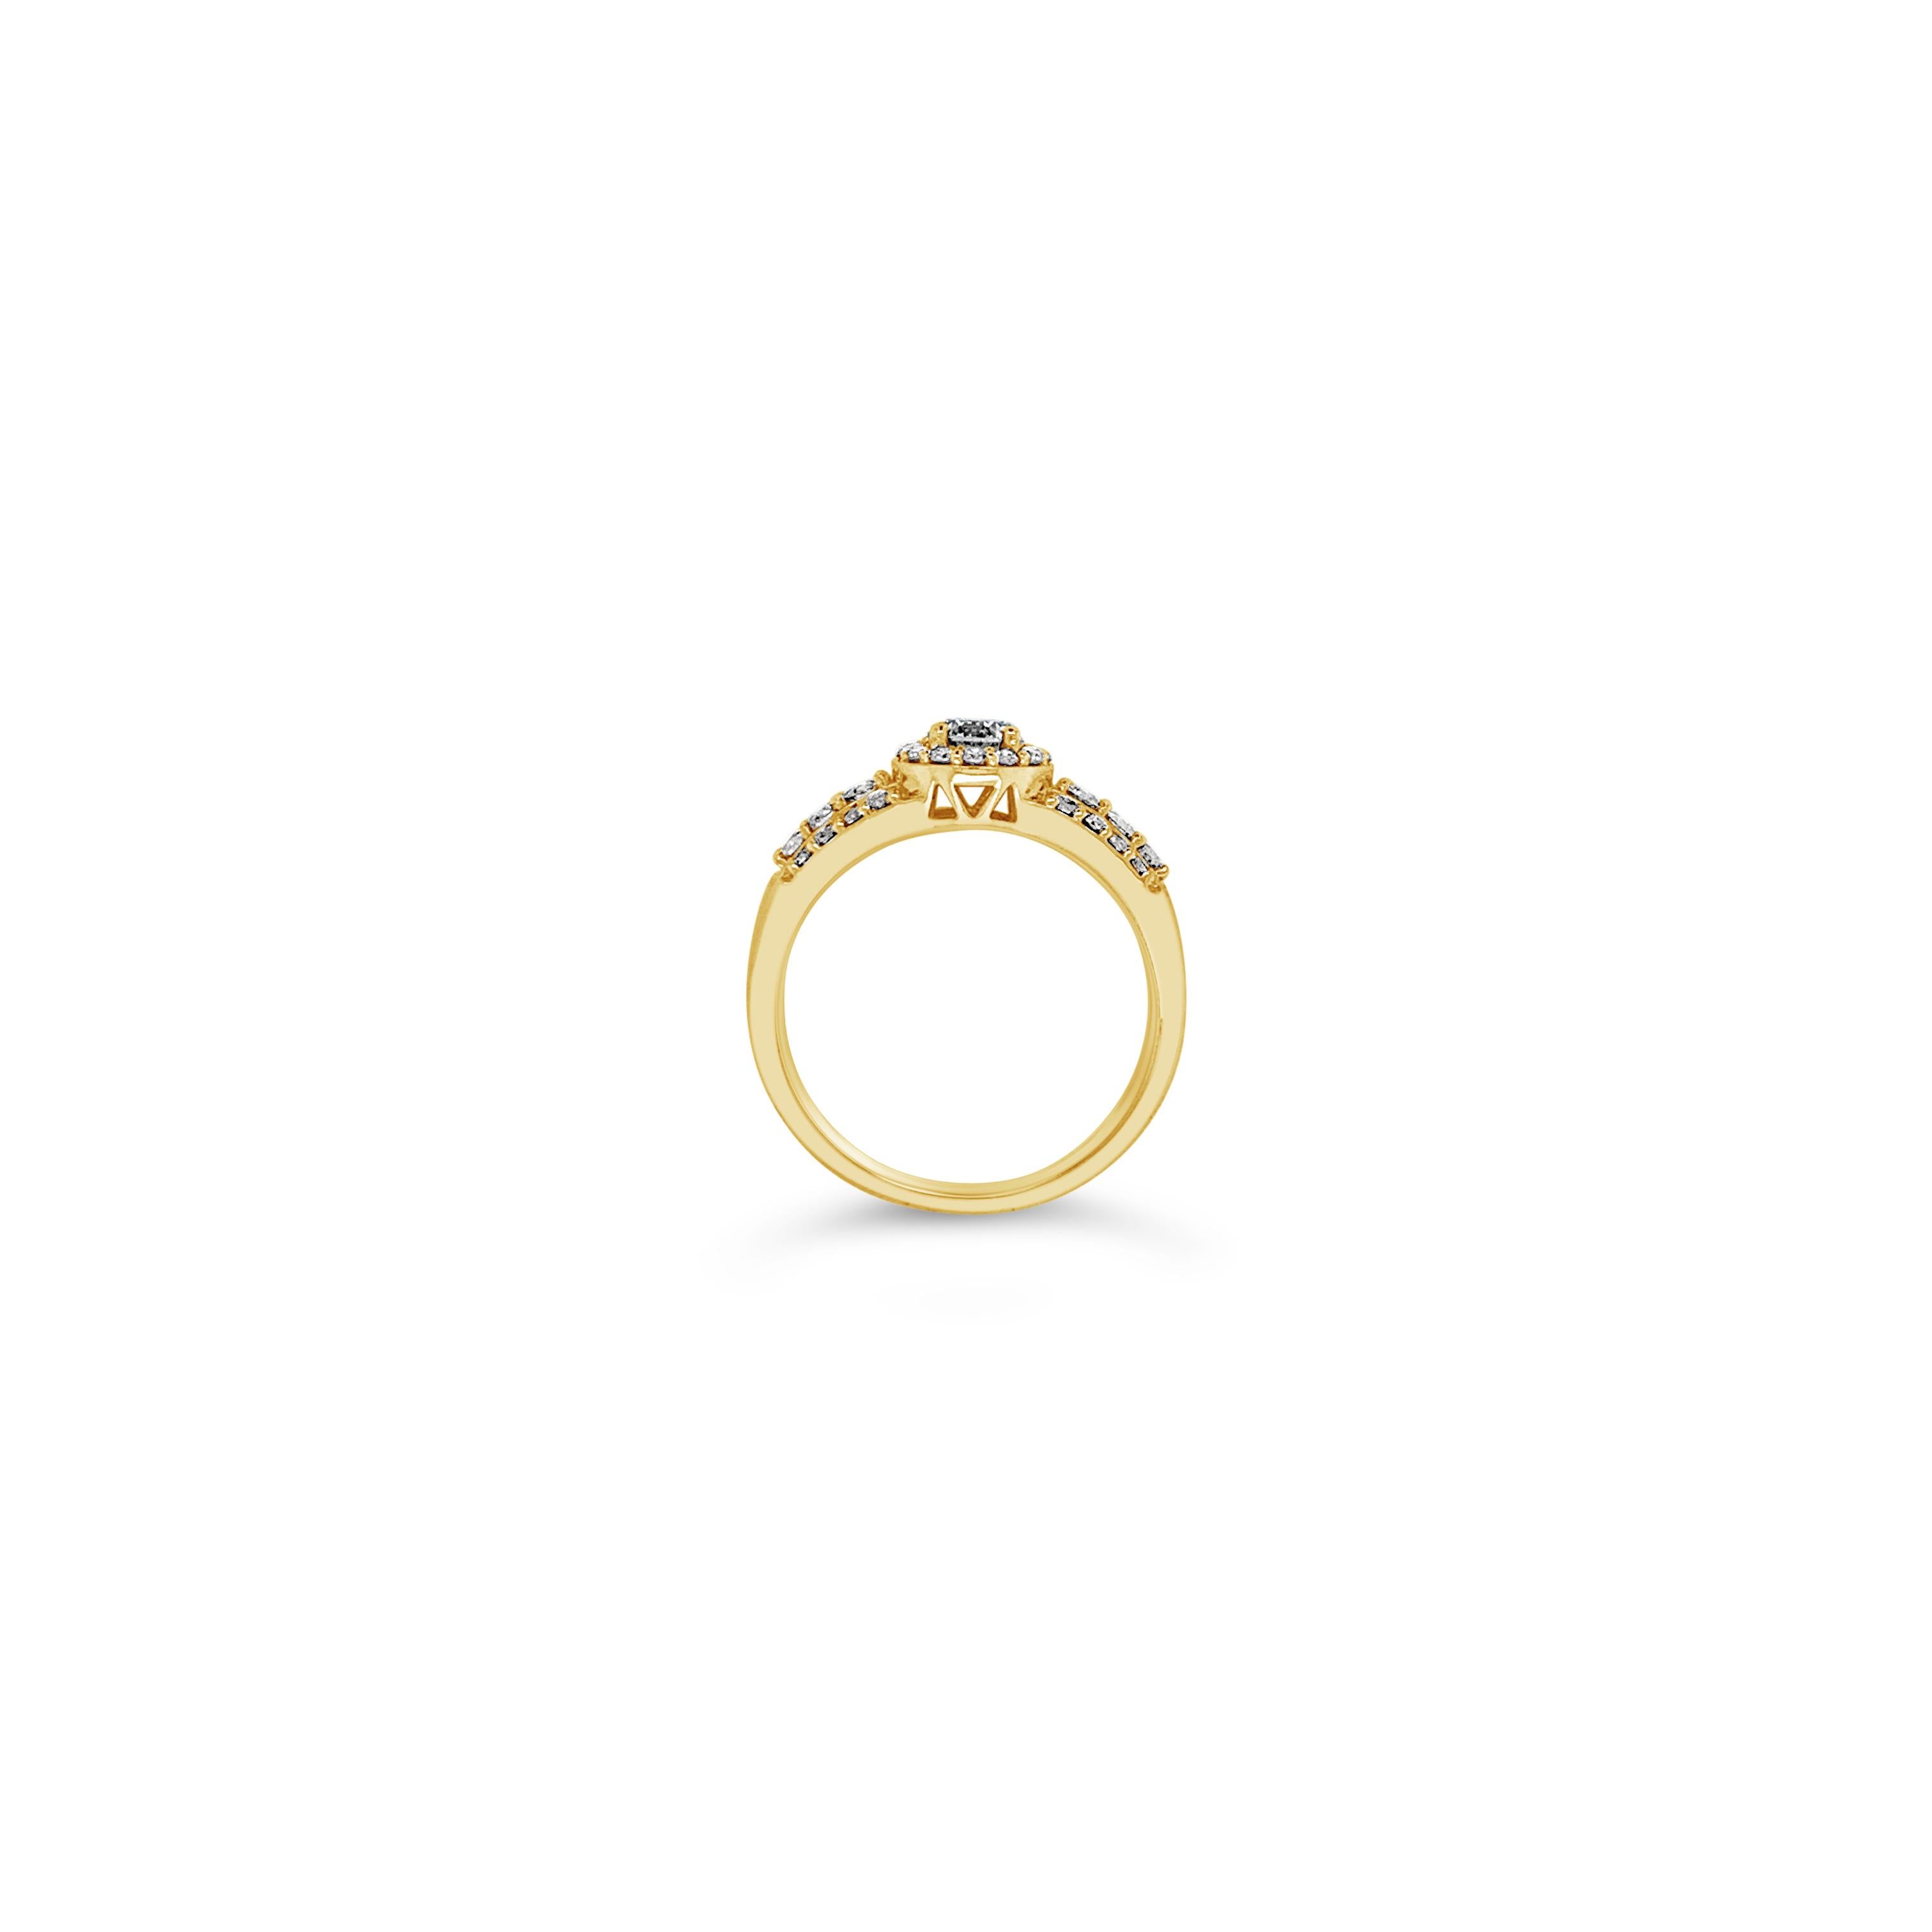 Le Vian Creme Brulee® Ring featuring .76 cts. Nude Diamonds set in 14K Honey Gold™

Diamonds Breakdown:
.76 cts Nude Diamonds

Gems Breakdown:
None

Ring may or may not be sizable, please feel free to reach out with any questions!

Item comes with a